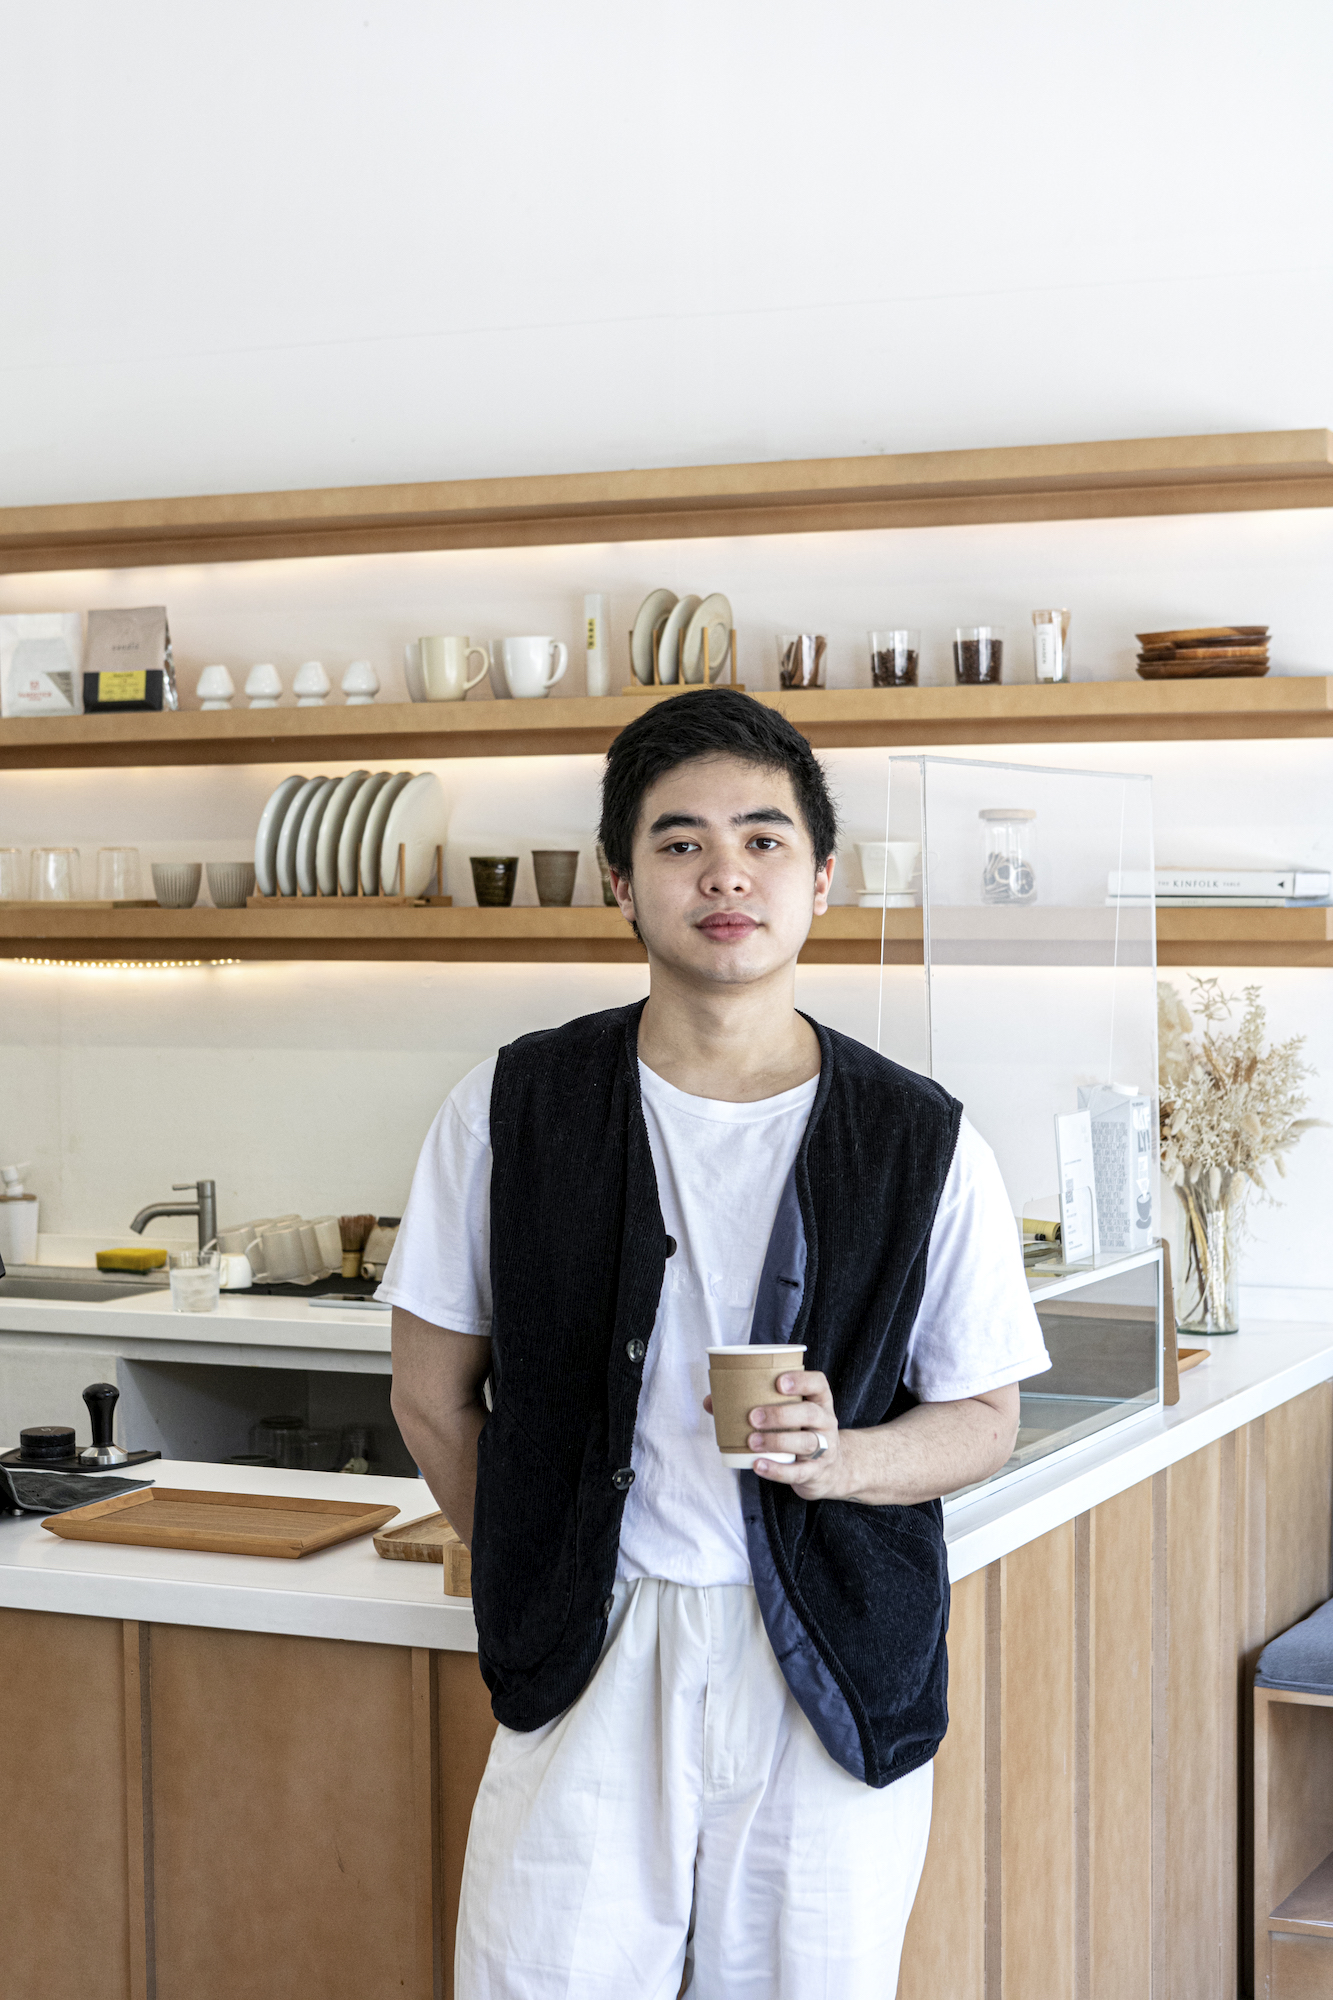 Twenty-five-year-old Niccolo Yabut is the brains behind Kalidad Coffee, a minimalist cafe in Angeles, Pampanga that serves specialty coffee